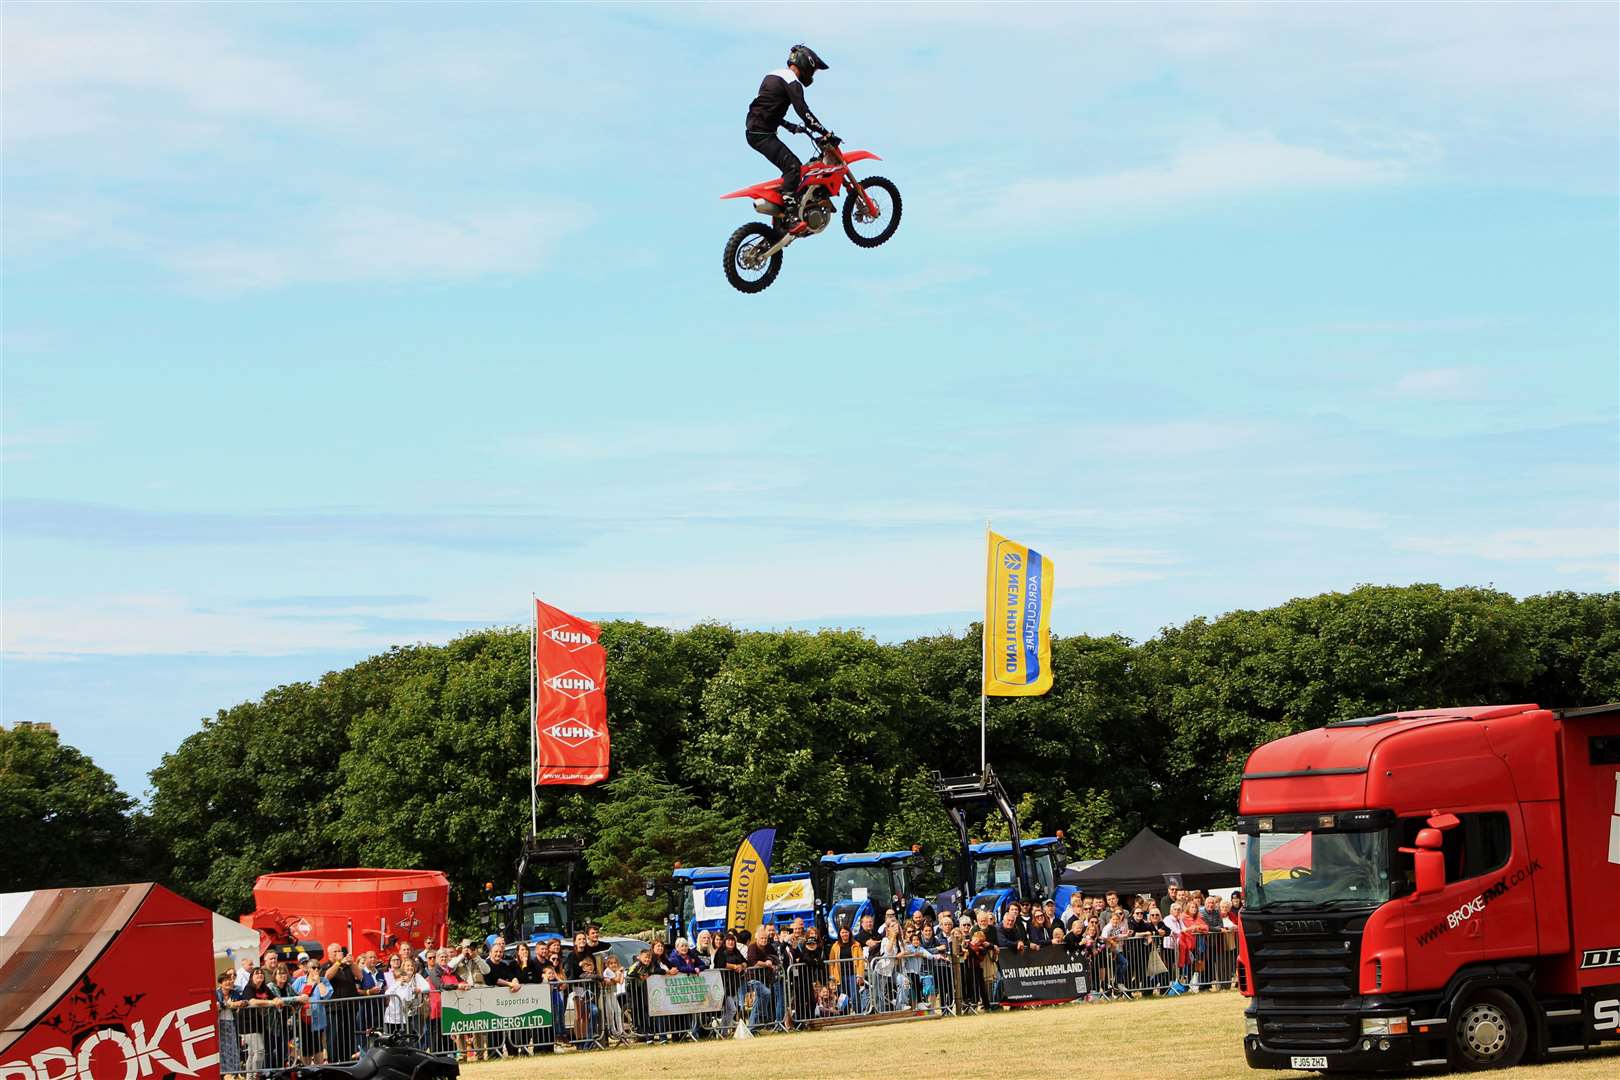 Broke FMX freestyle motocross rider John Pearson soaring above the show field at Thurso East. Picture: Alan Hendry